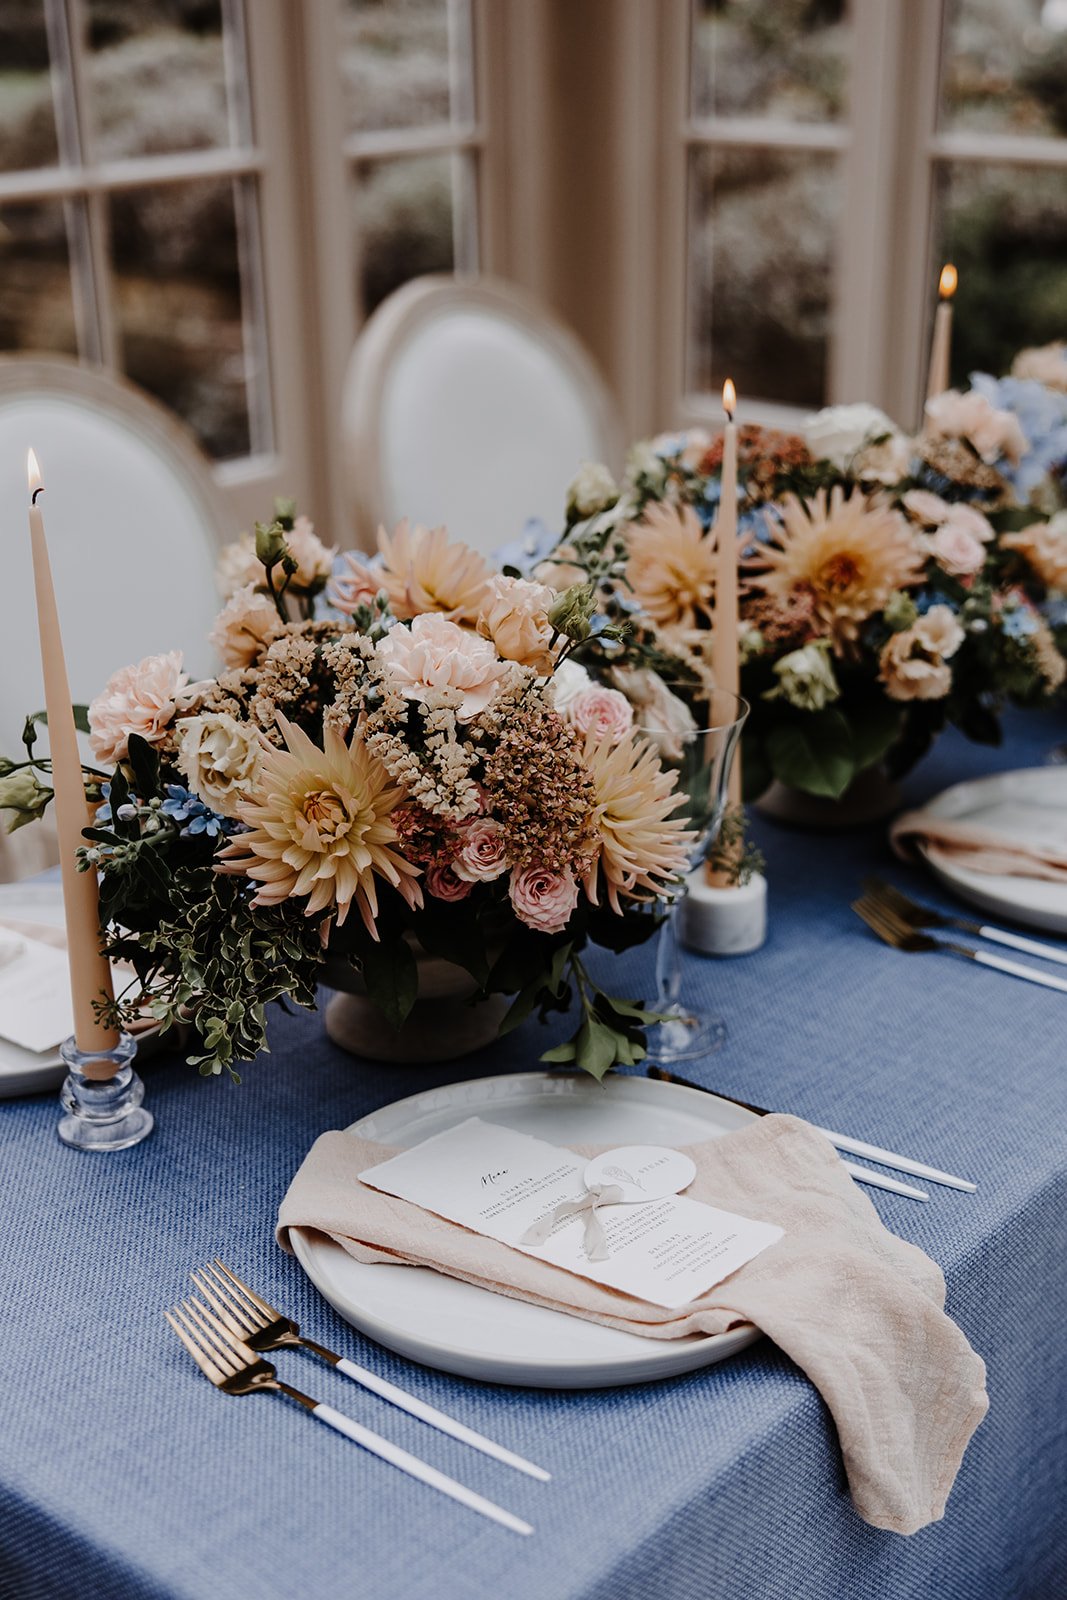  Showcasing the details of the wedding flowers and wedding breakfast table that are captured by wedding content creator as a reel for the couple to cherish forever.  Photo by: Megan Melissa Photography 